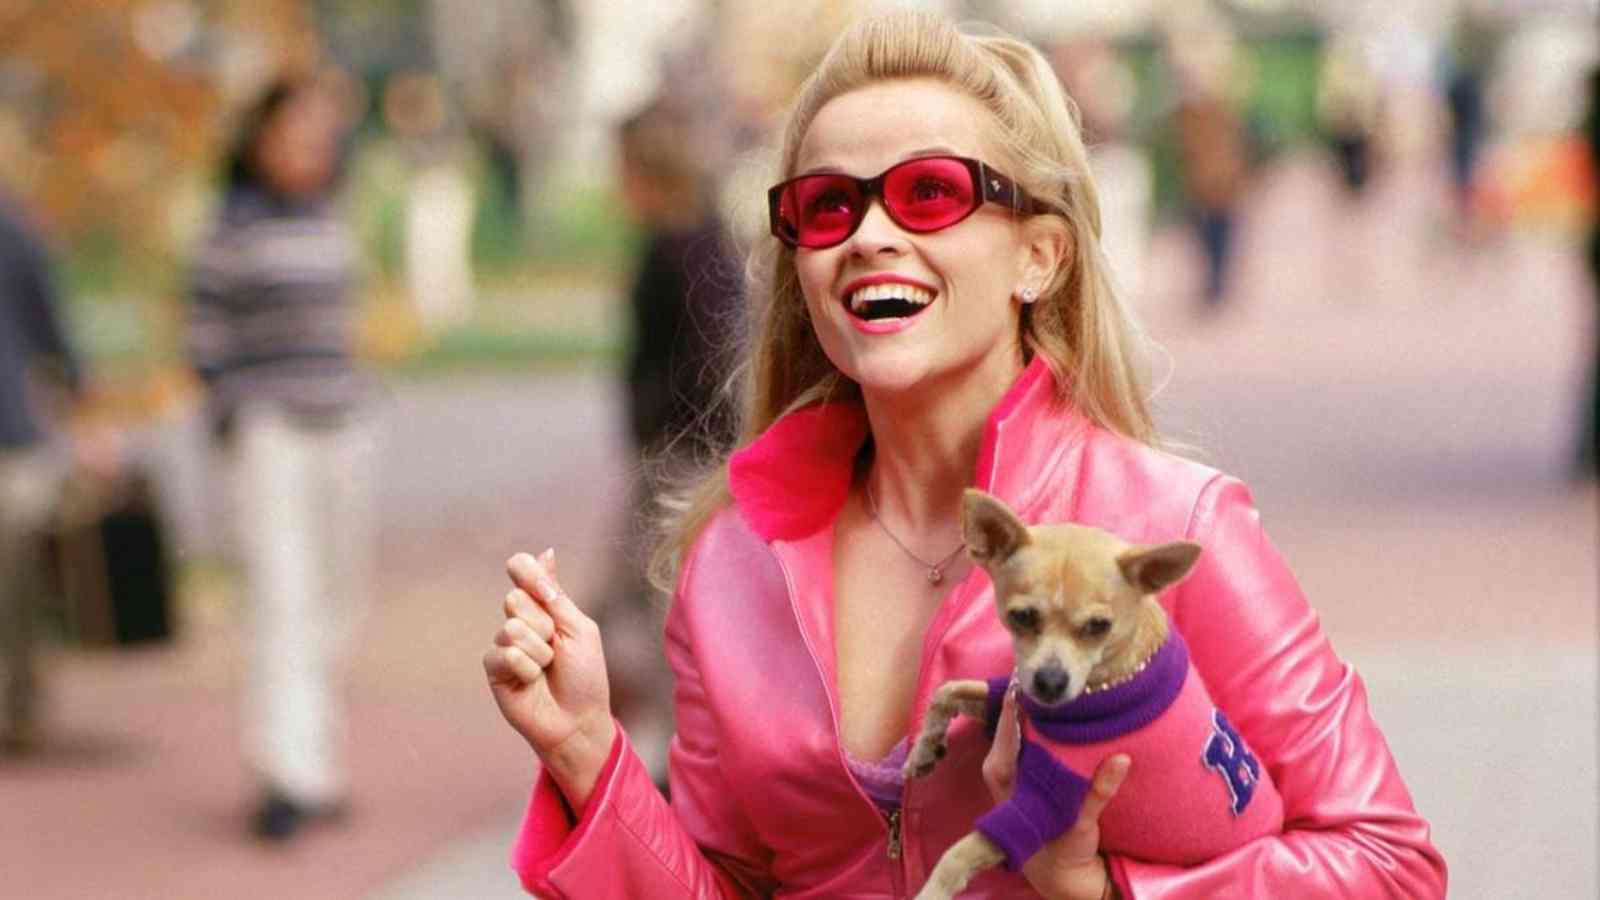 Reese Witherspoon Reveals How Tom Cruise's 'Top Gun: Maverick' Inspired Her  For 'Legally Blonde 3' - First Curiosity